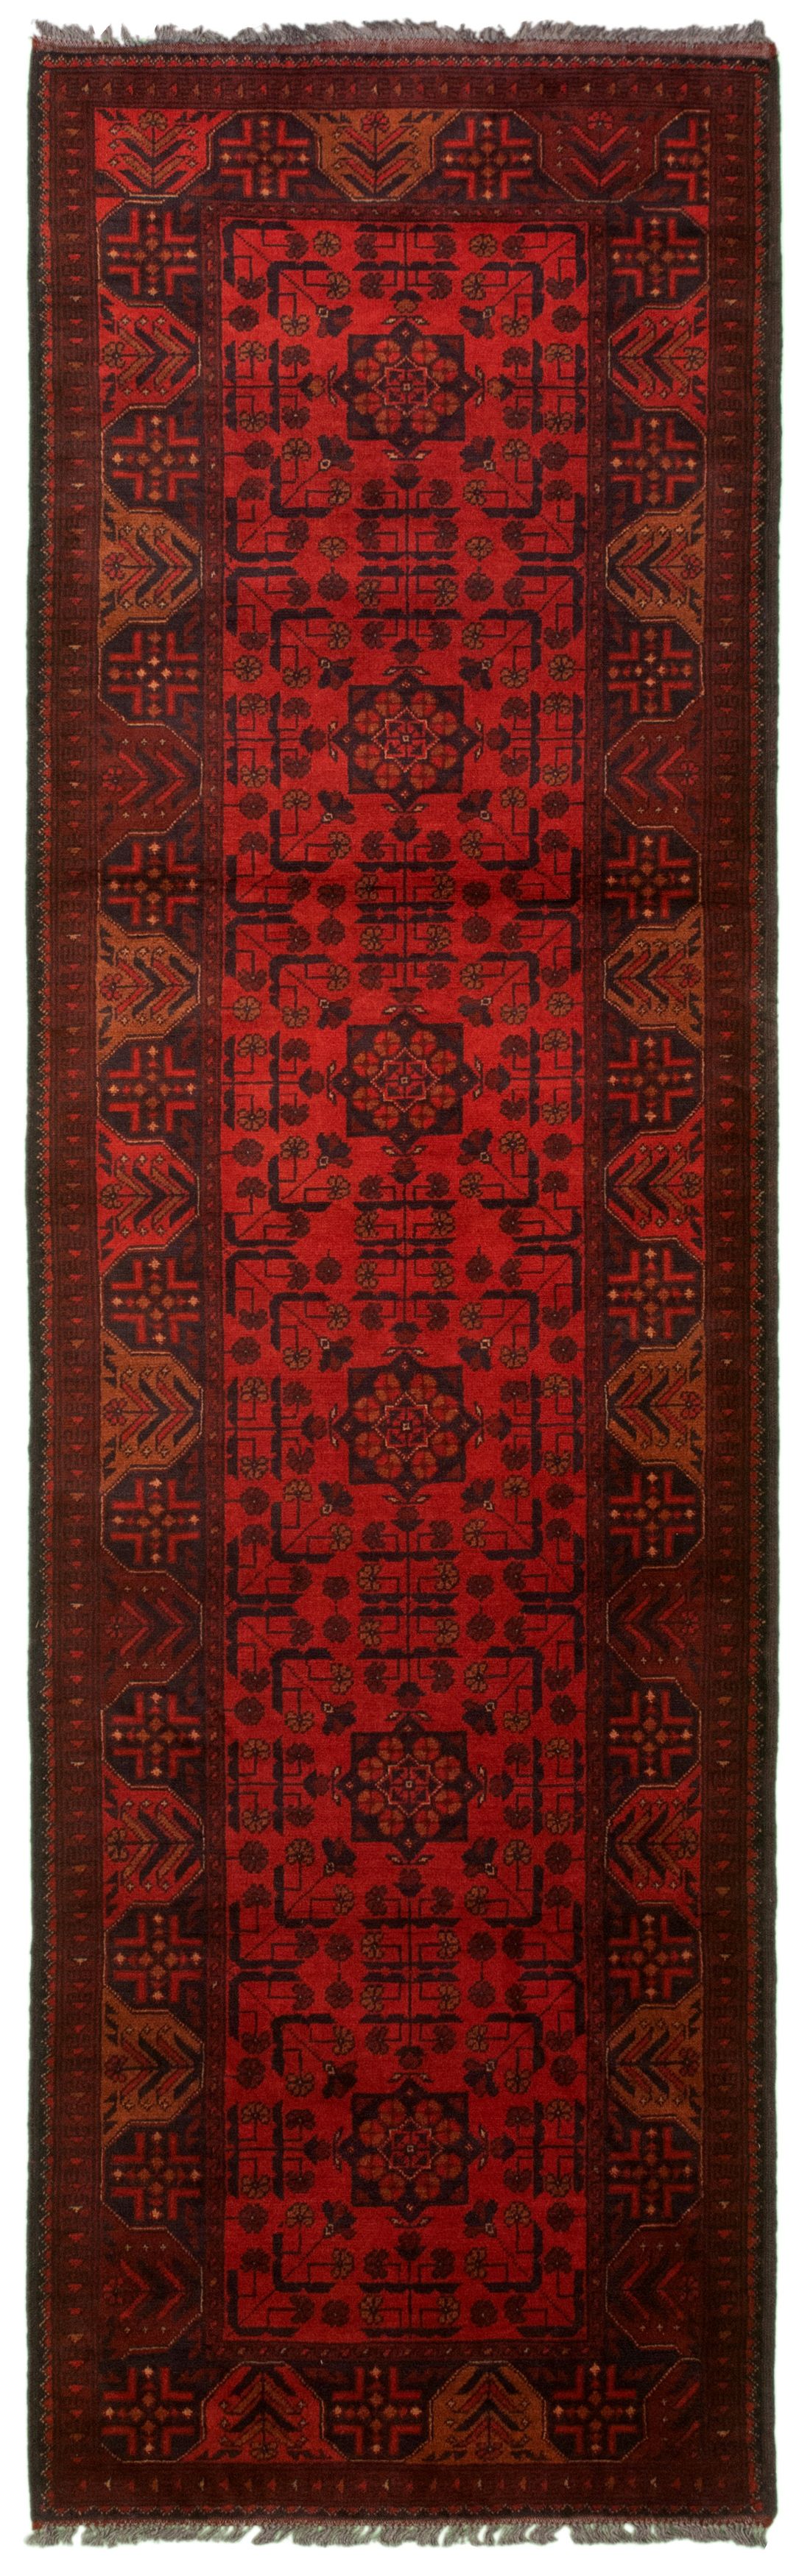 Hand-knotted Finest Khal Mohammadi Red Wool Rug 2'9" x 9'9" Size: 2'9" x 9'9"  